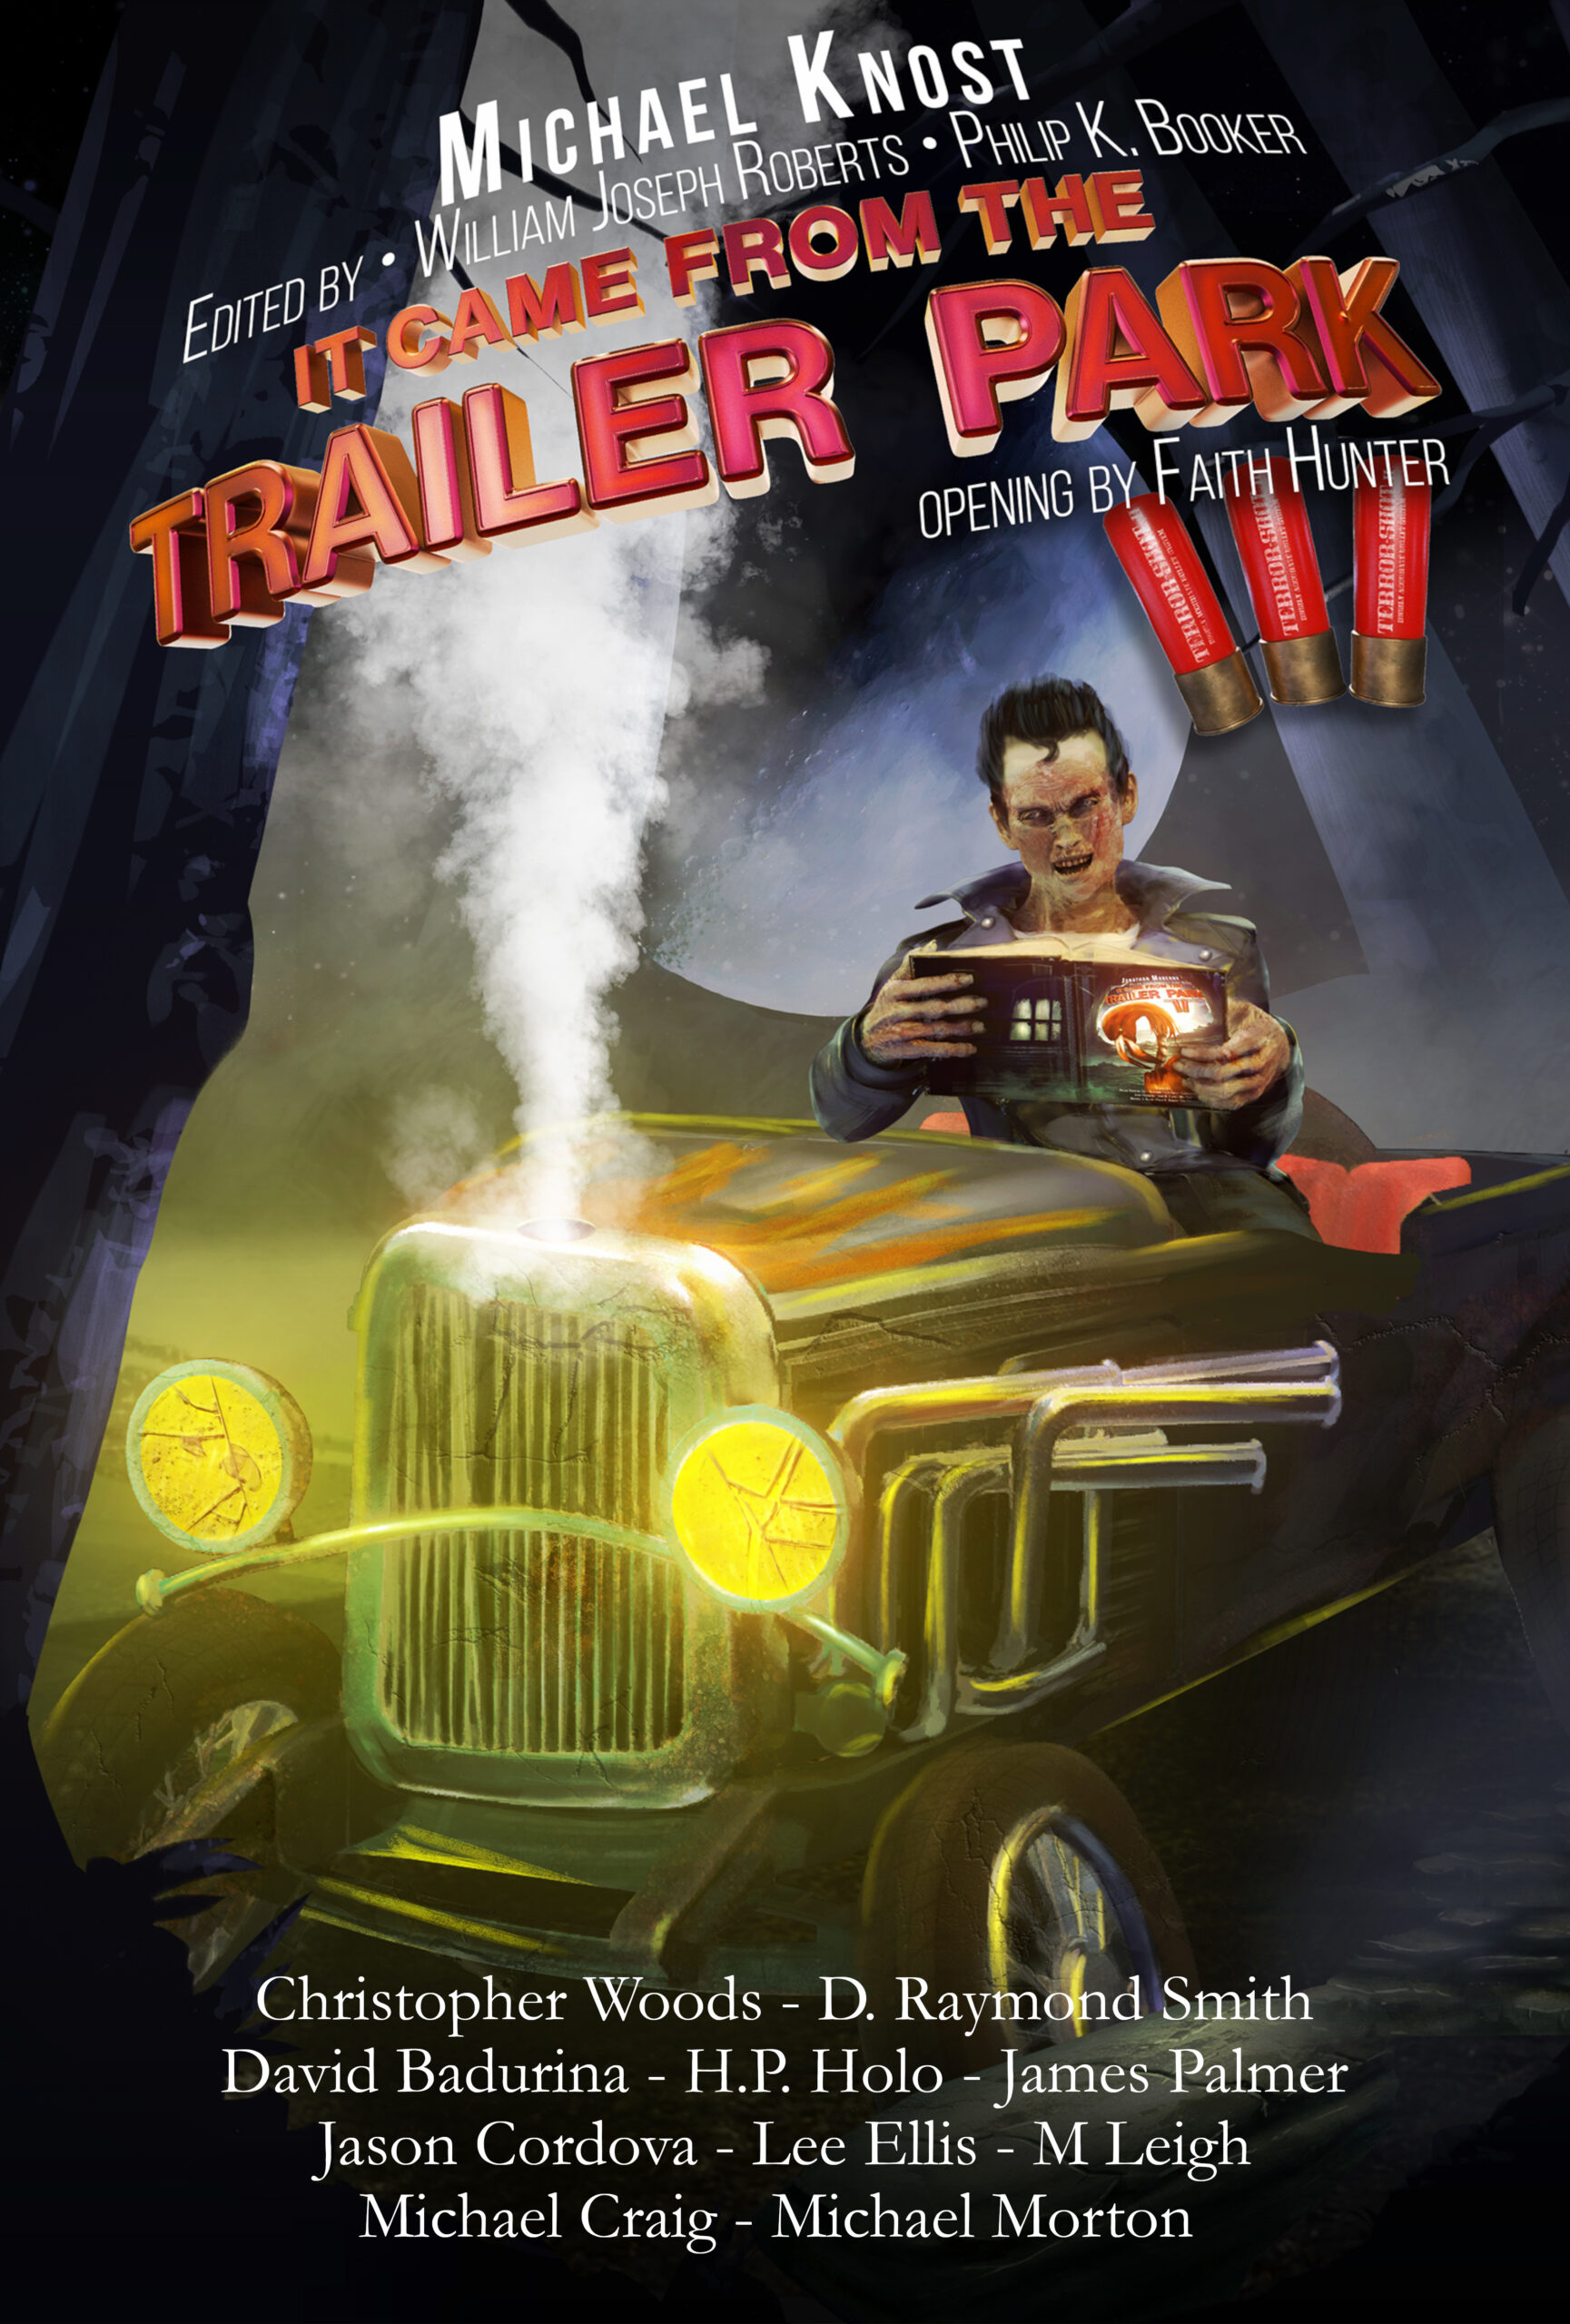 It Came From the Trailer Park: Volume 2 by William Joseph Roberts